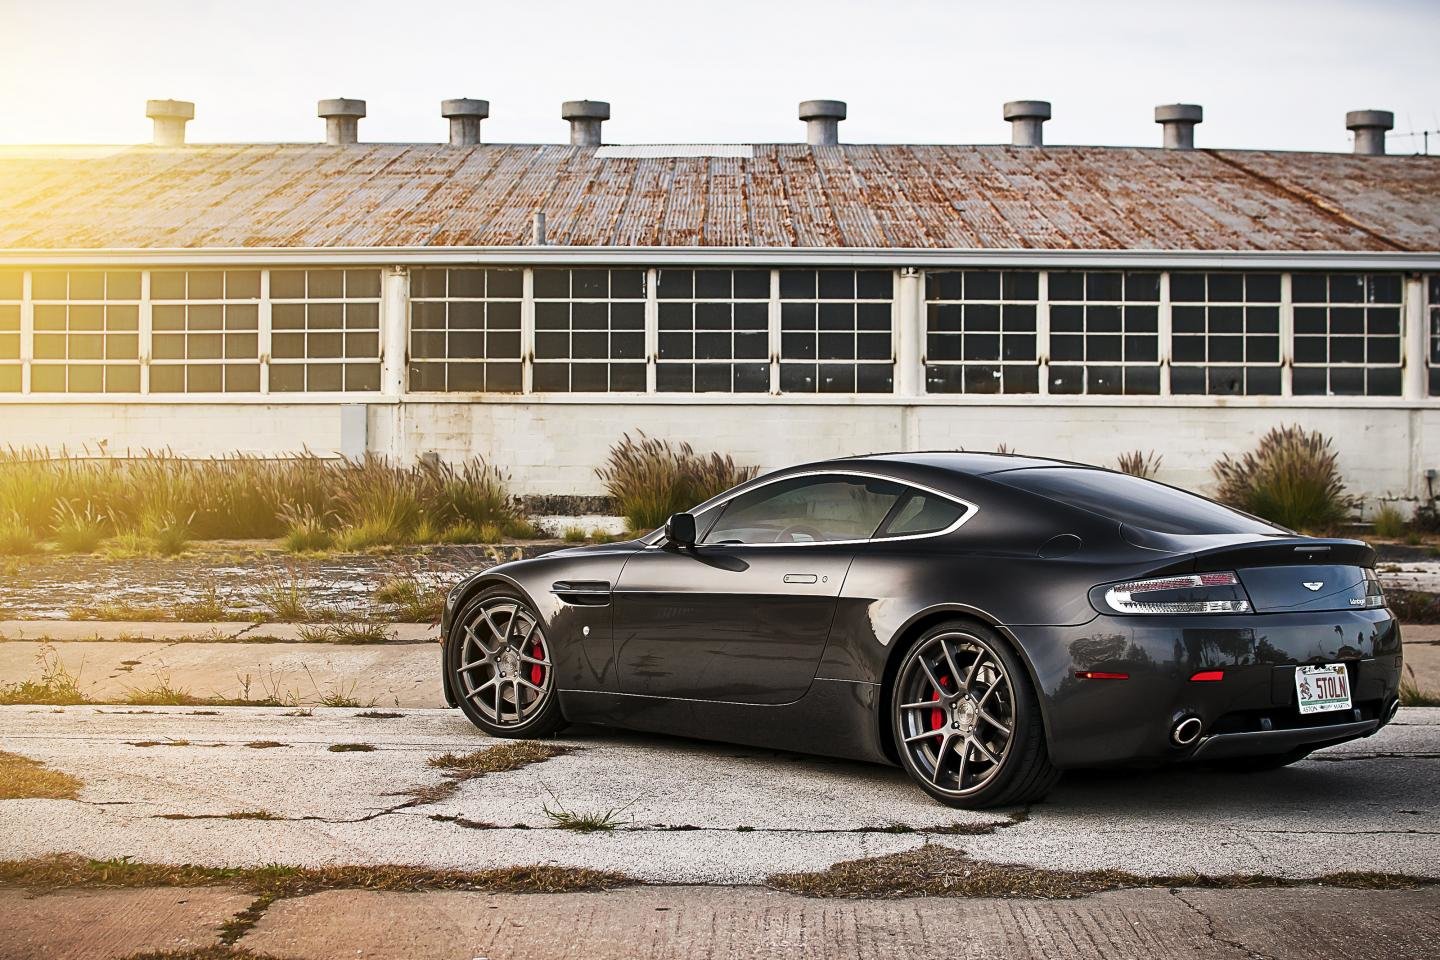 Awesome Aston Martin V8 Vantage free background ID:326373 for hd 1440x960 PC